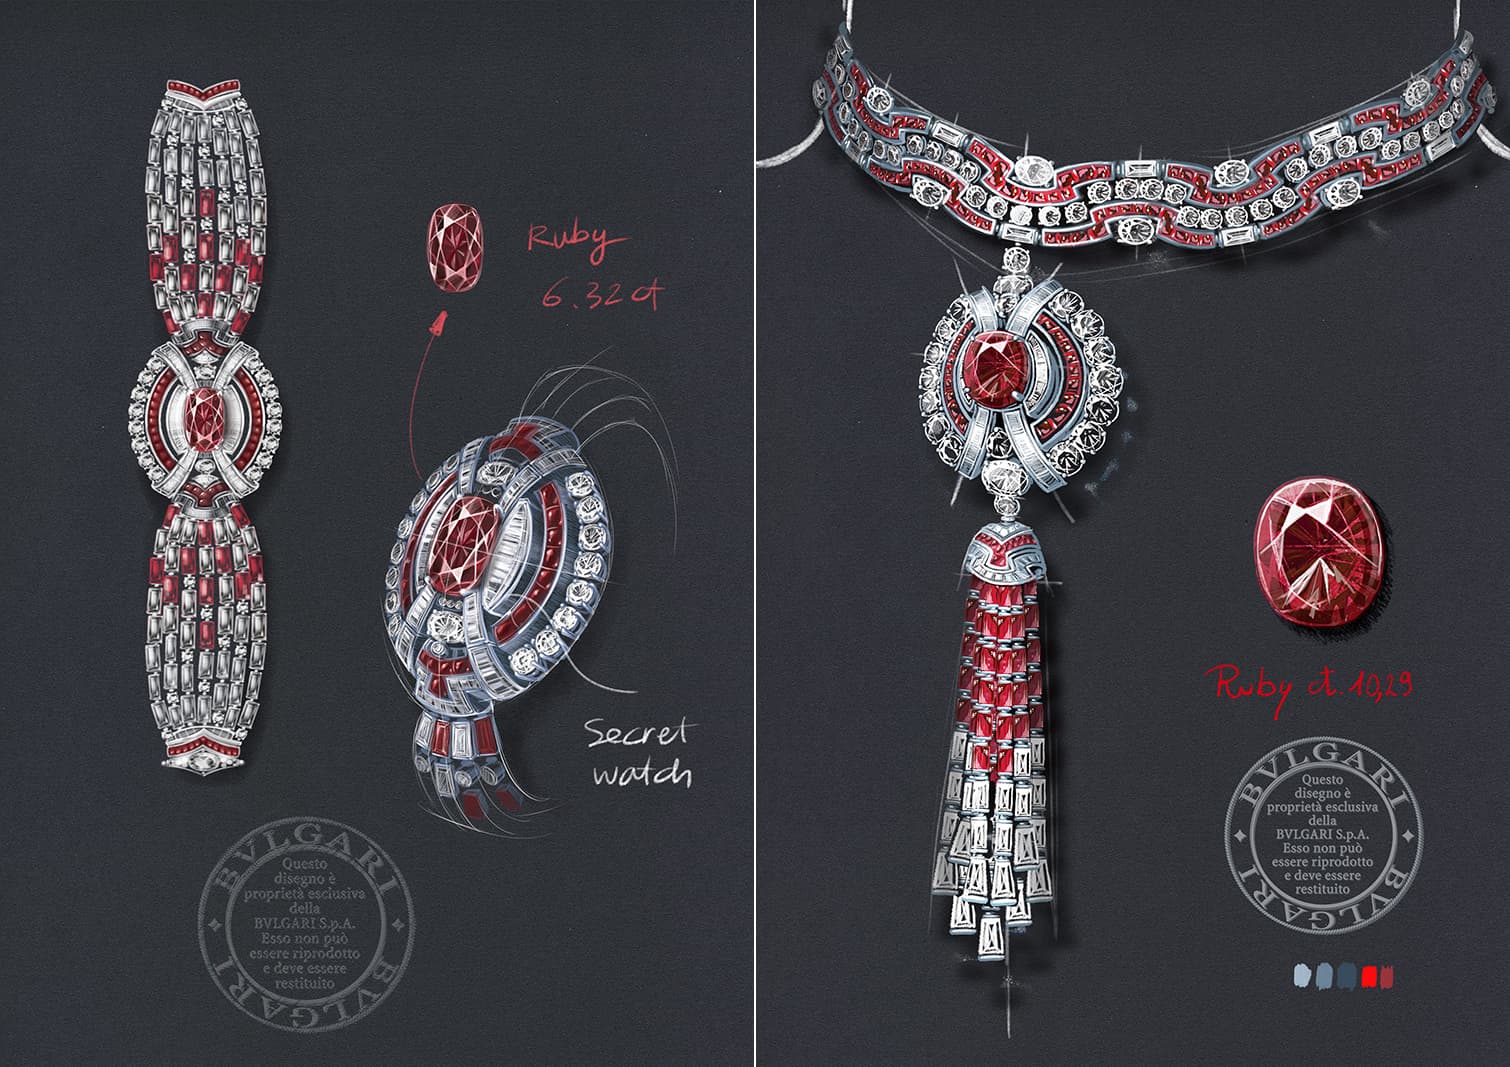 Drawings of new creations in the Bulgari MAGNIFICA High Jewellery collection, including the Ruby Metamorphosis secret watch (left) 